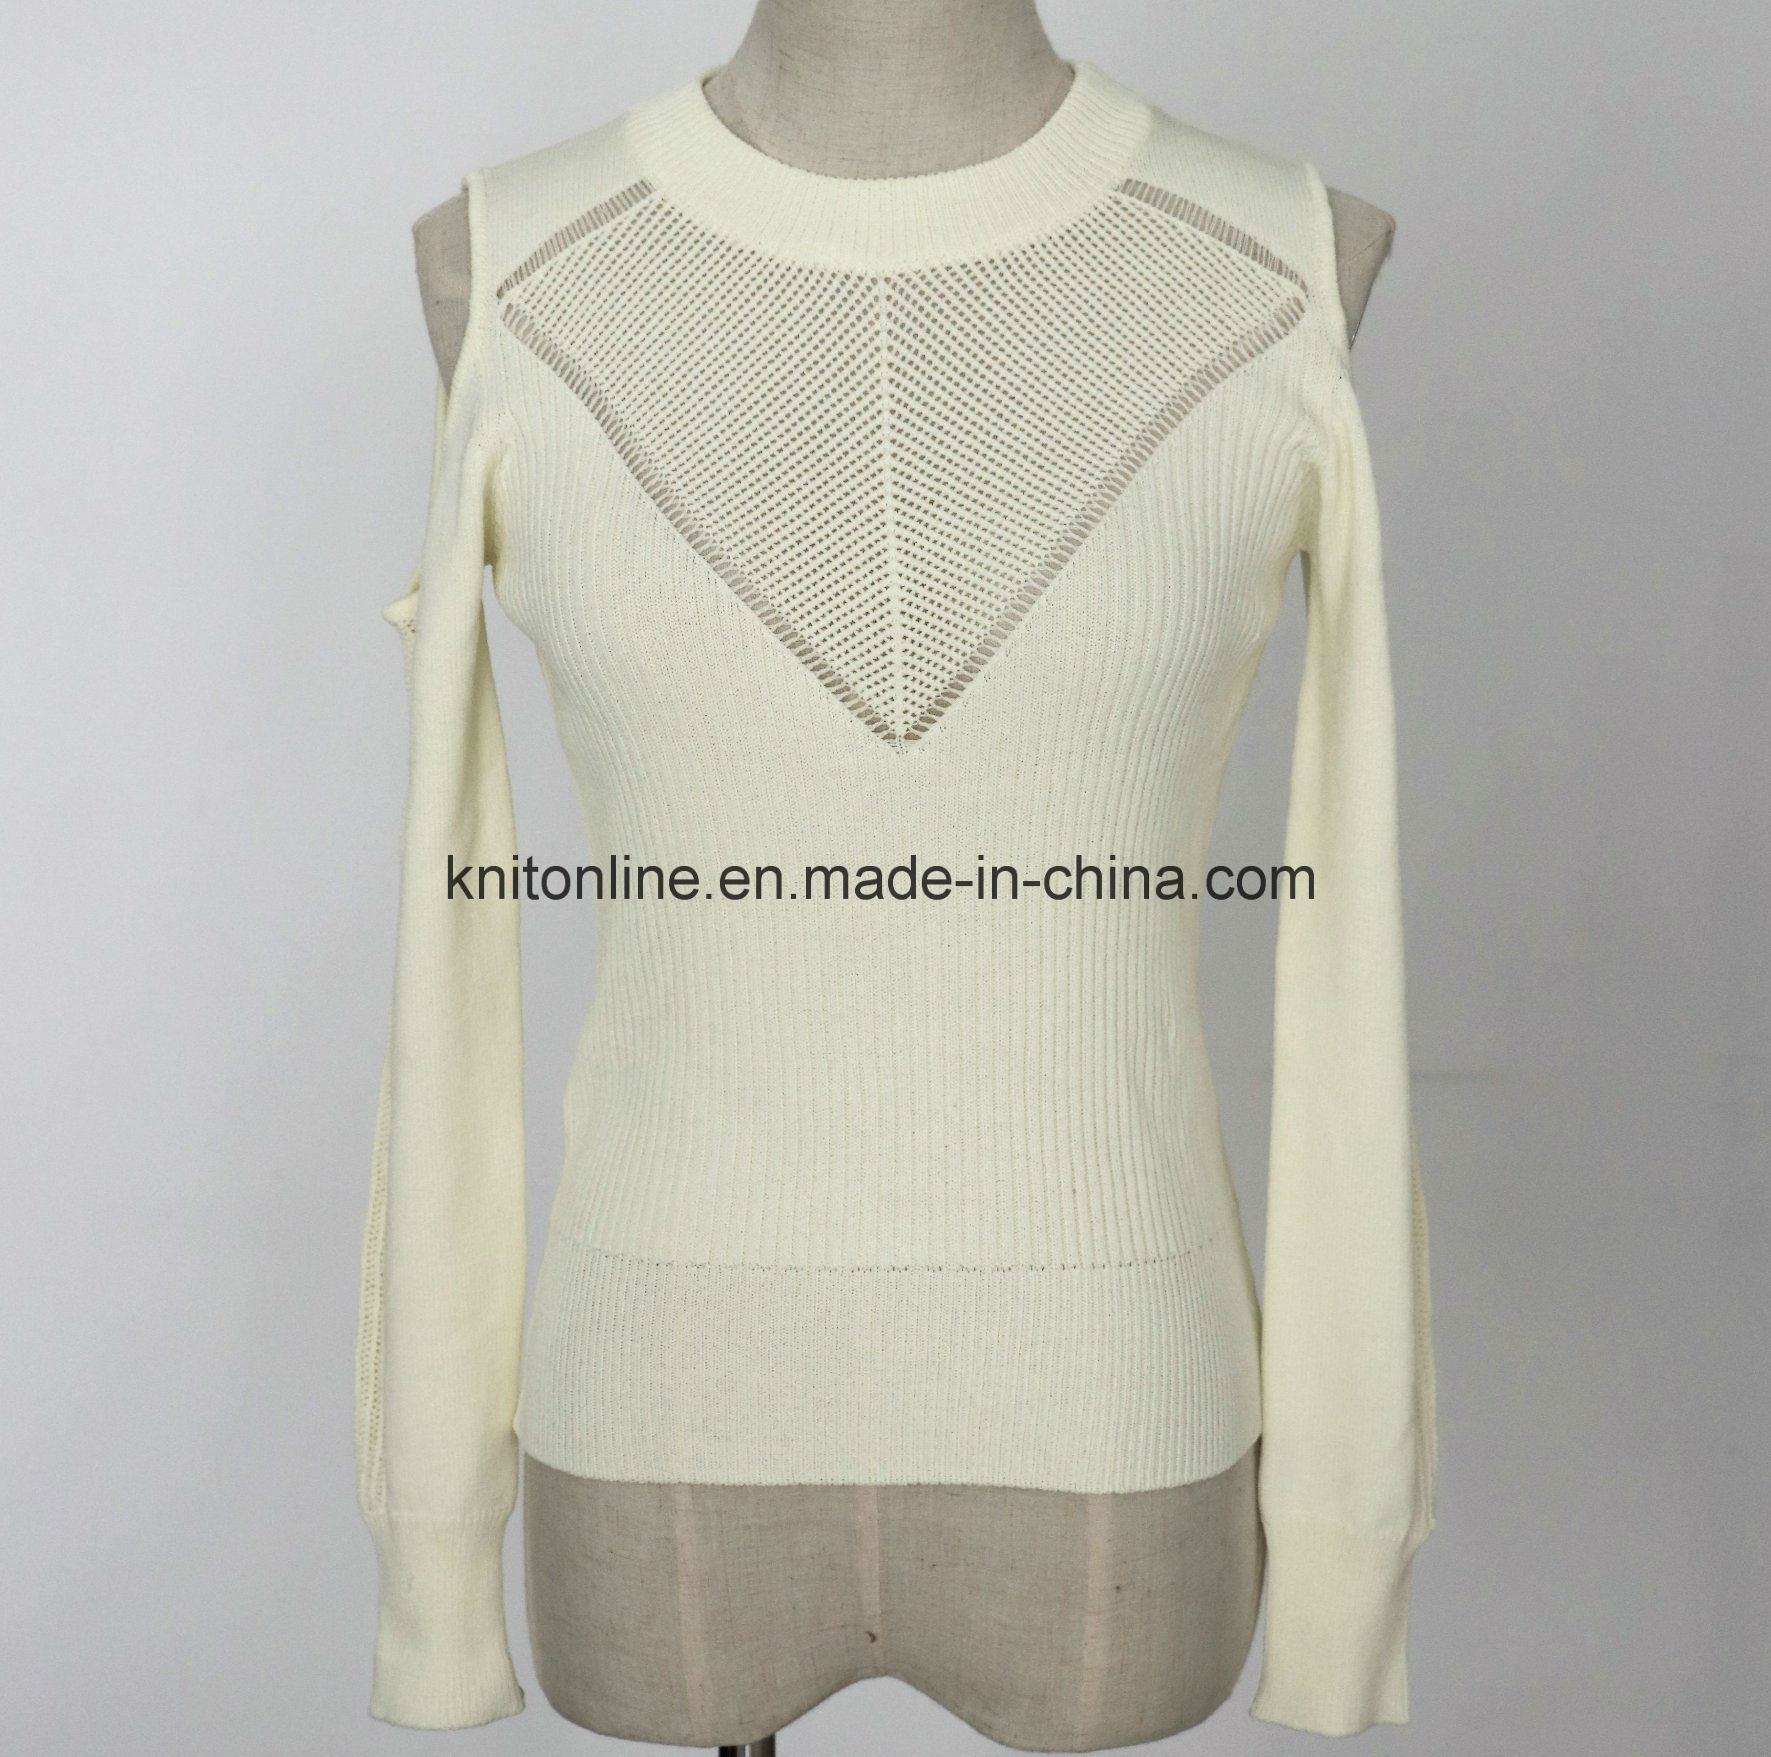 Ladies' Fashion Ribbed Dew Shoulder Stretch Sweater with Round Neck and Long Sleeves, Front and Back Crochet